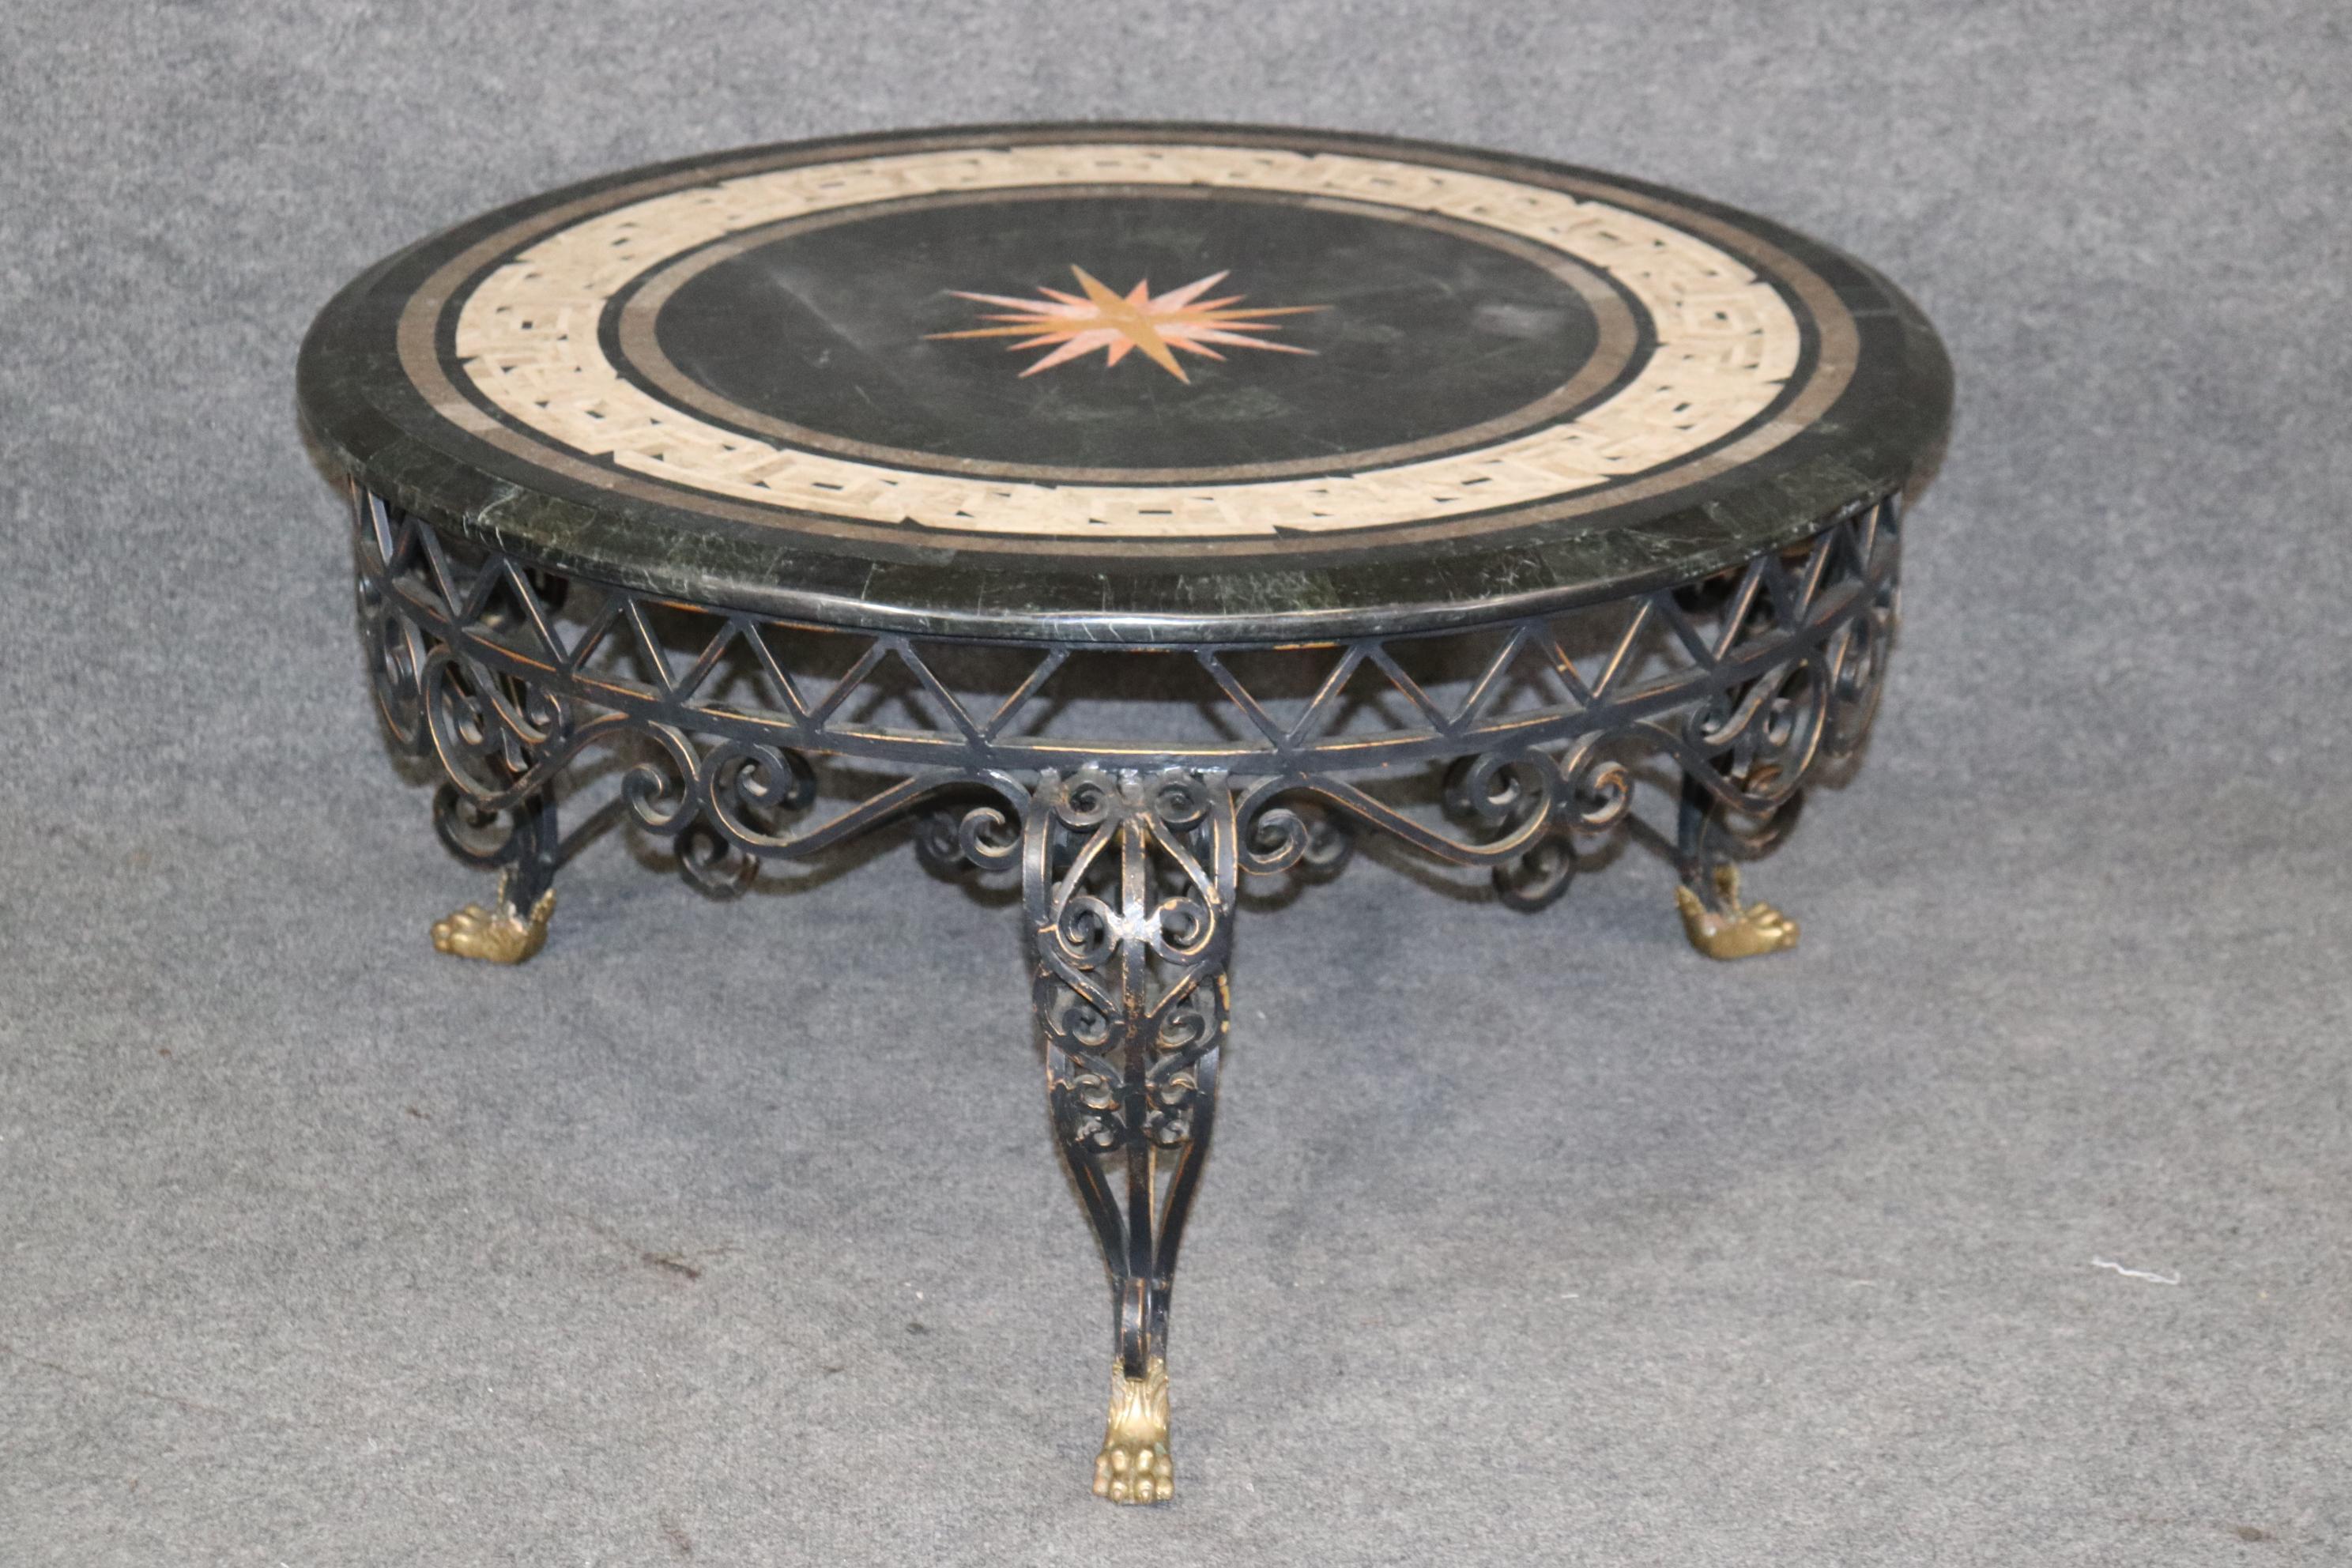 Dimensions- H: 19 1/4in W: 37 1/2in D: 37 1/2in 

This vintage Maitland Smith Style tessellated marble top iron coffee table is made of the highest quality and is perfect for you and your home! For over four decades, Maitland-Smith has been creating